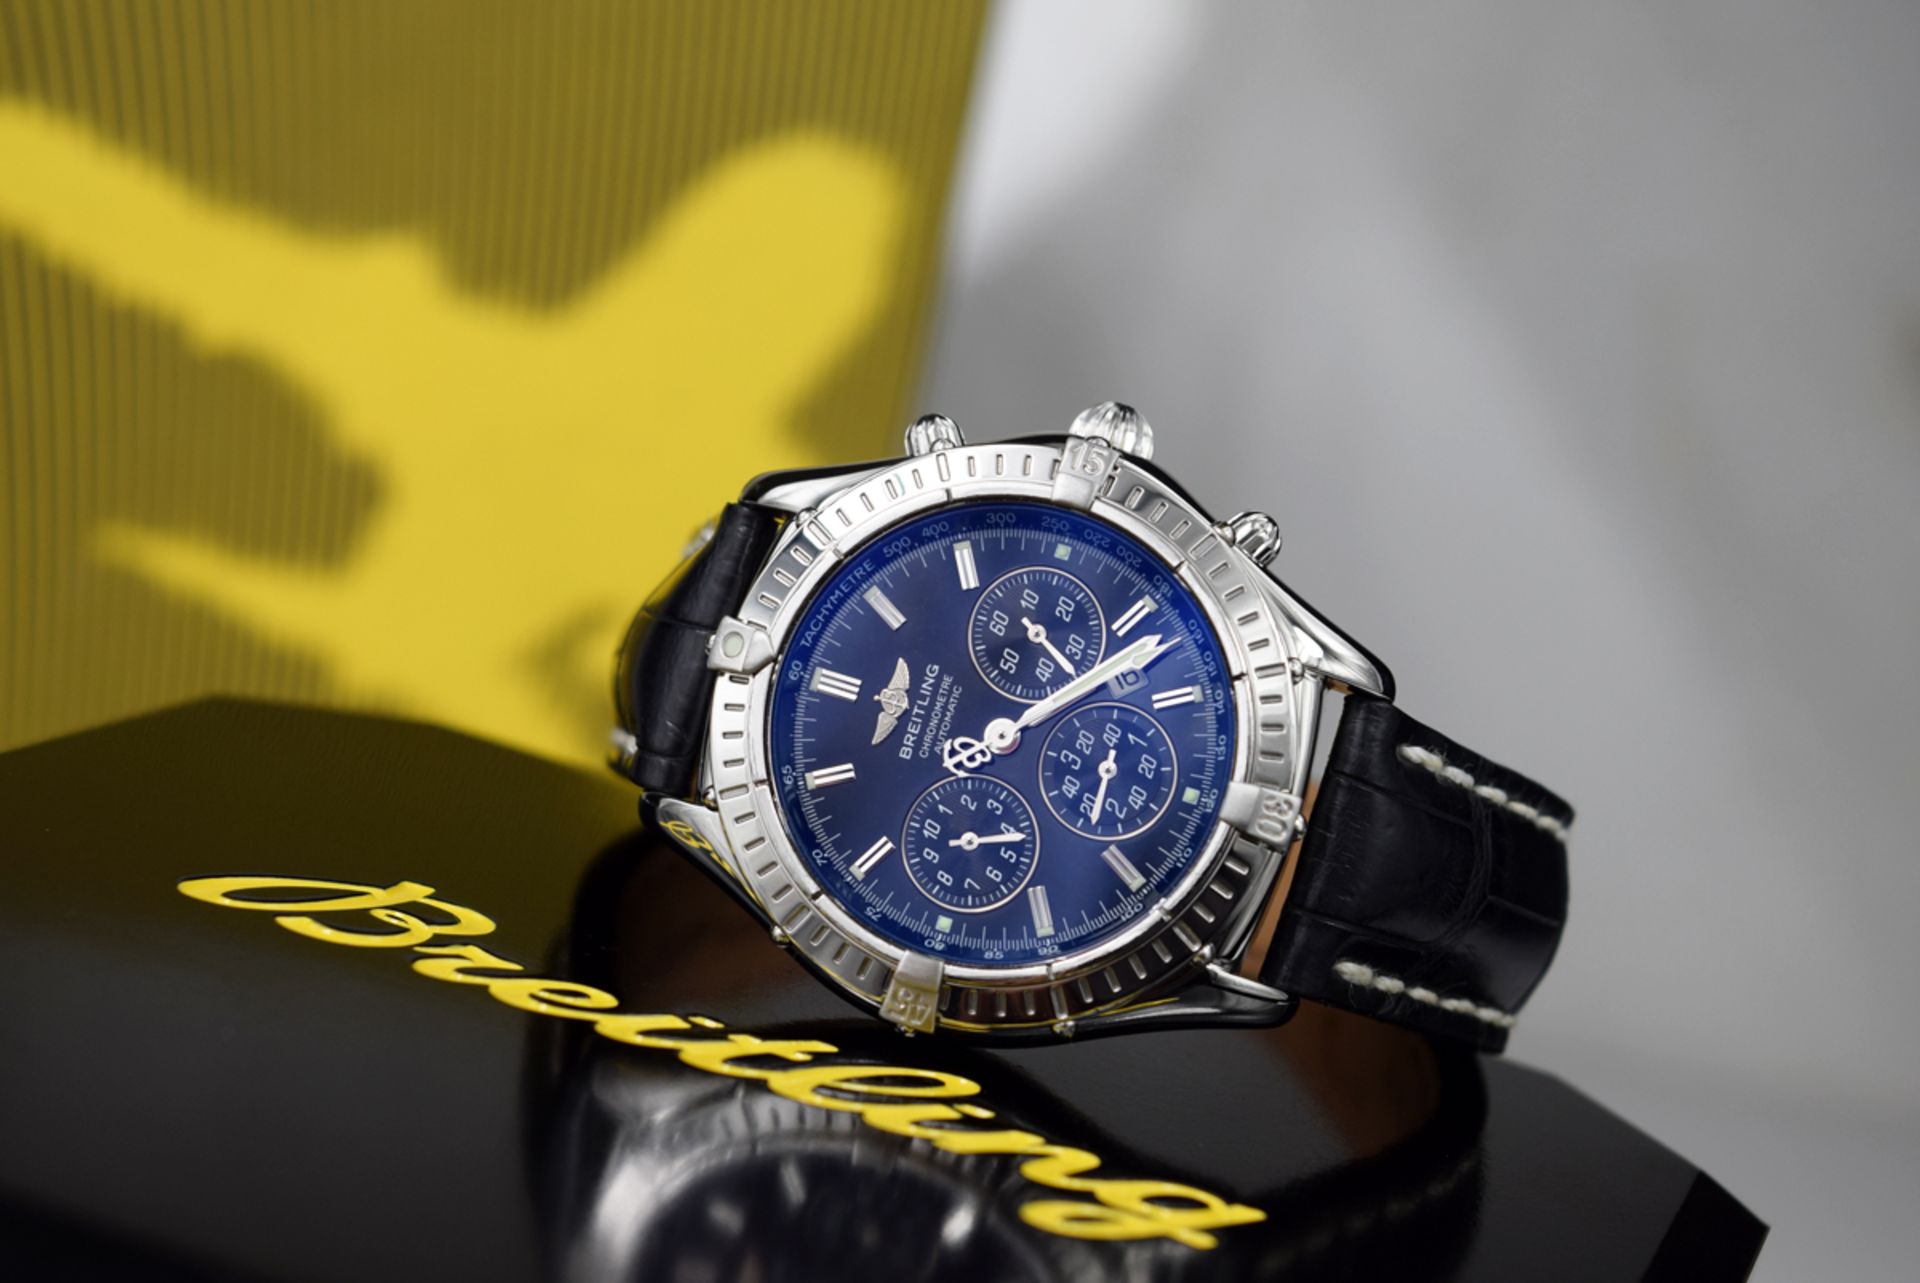 BREITLING - SHADOW FLYBACK / CHRONOGRAPH in STEEL - Image 8 of 11